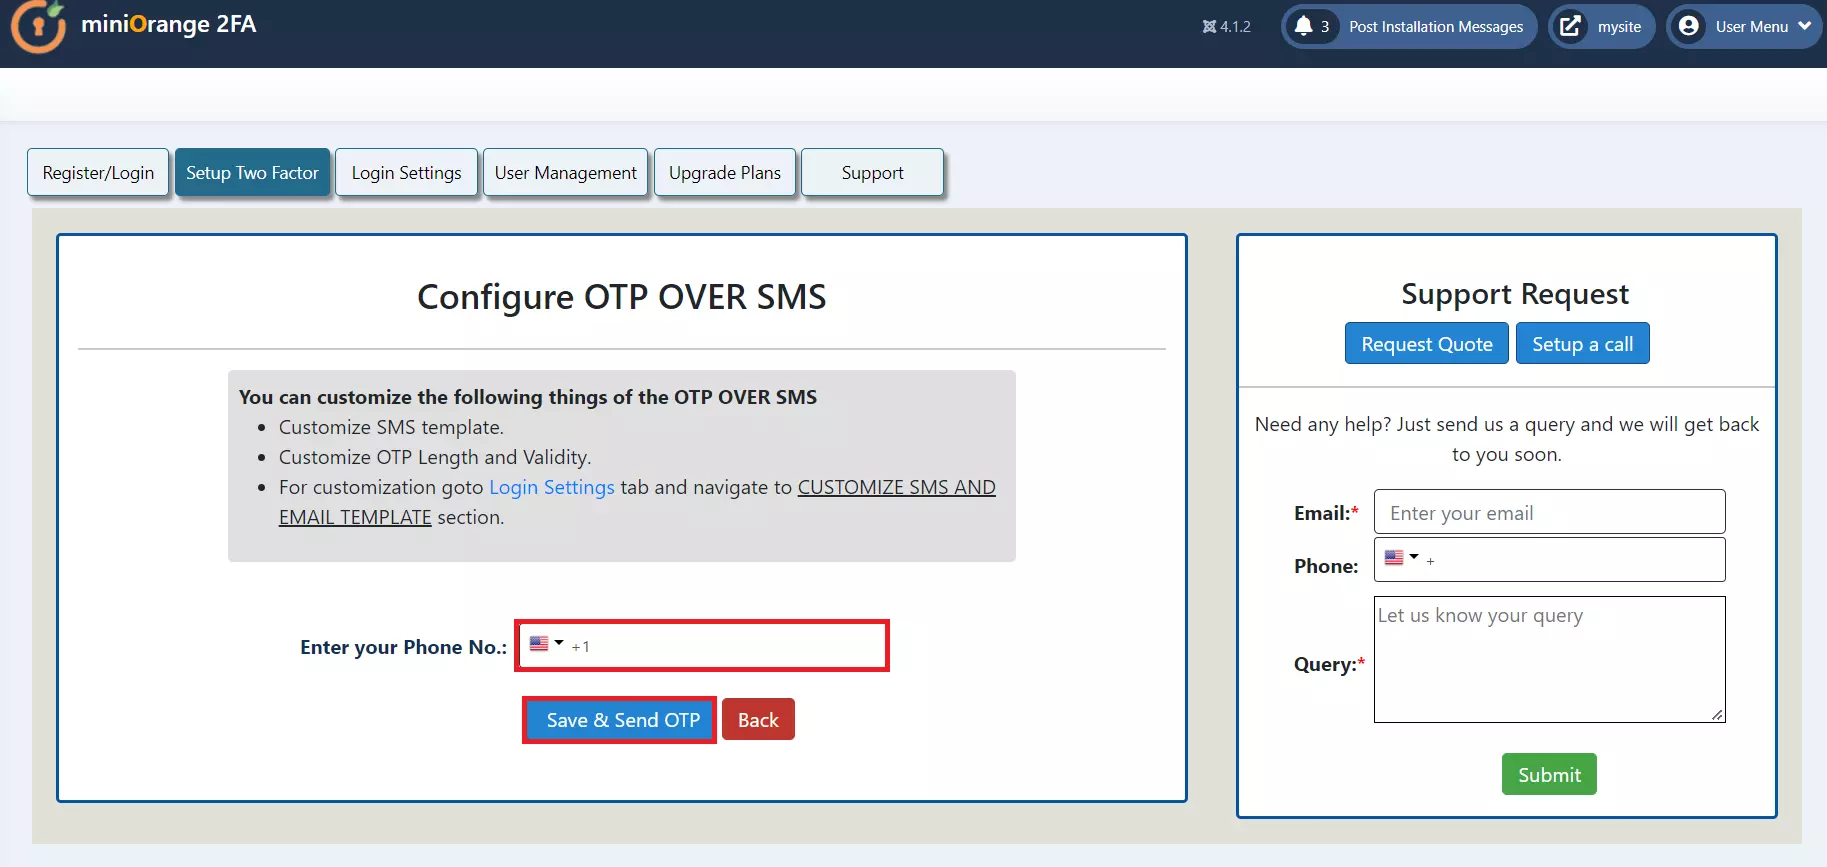 Joomla 2 Factor authentication (2FA) (MFA) with OTP over SMS , 